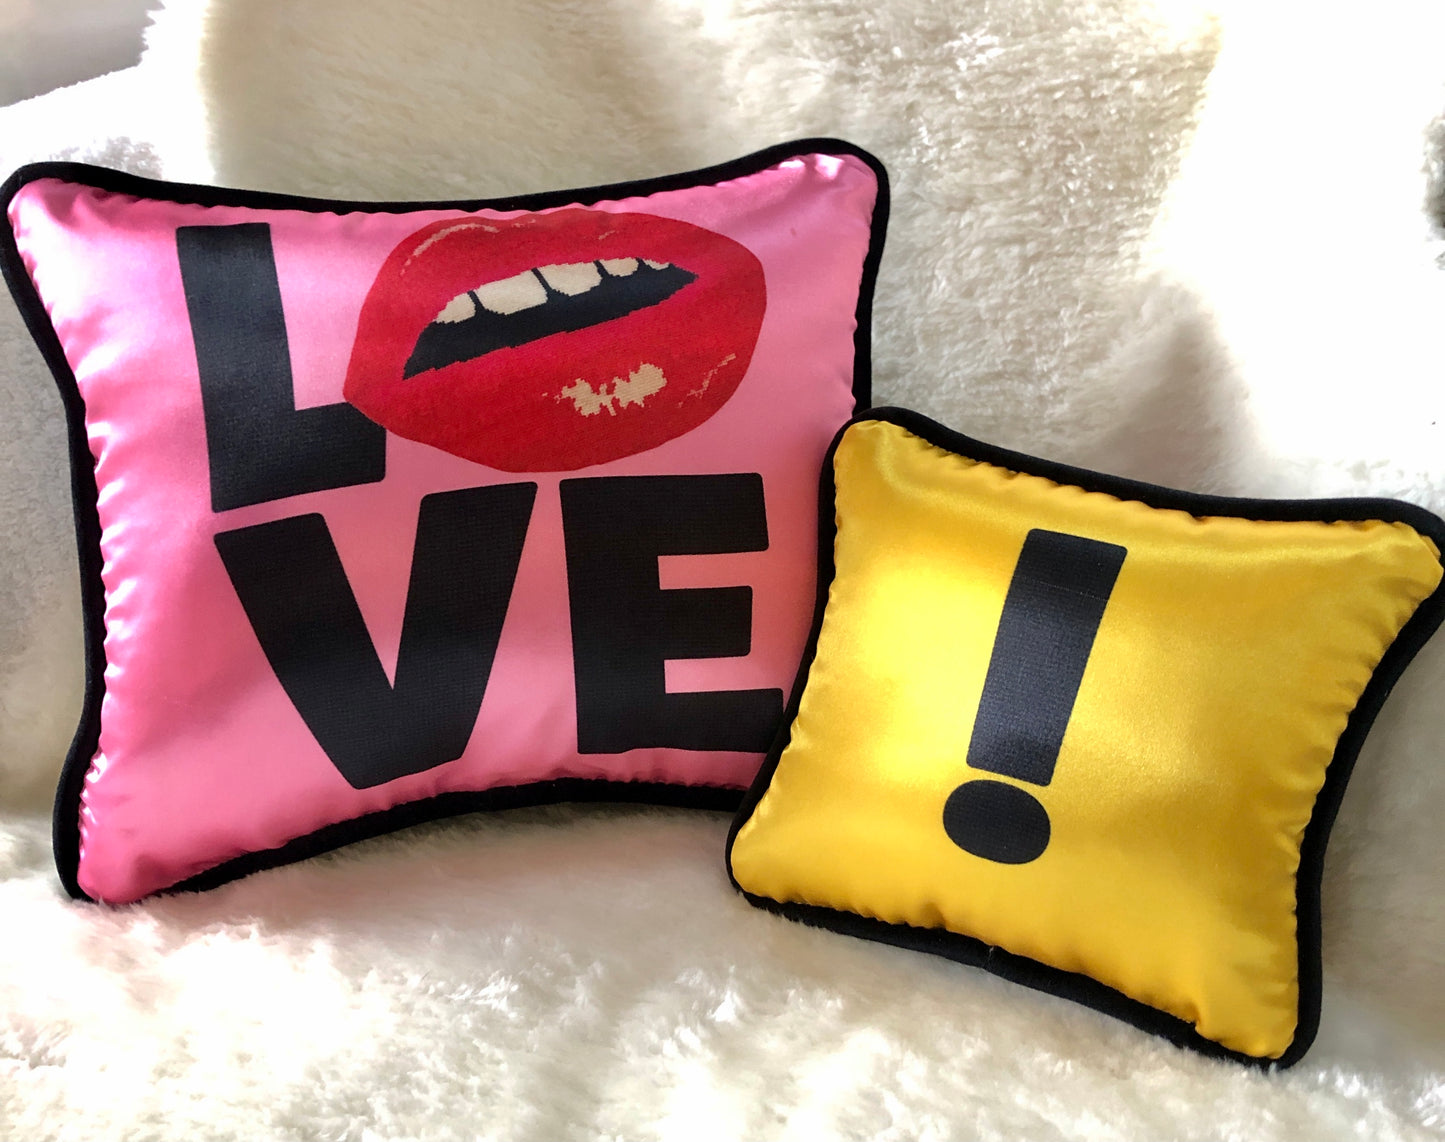 hot pink pillow with blackletters - L, red lips for an O, V & E stacked underneath with yellow pillow & black !